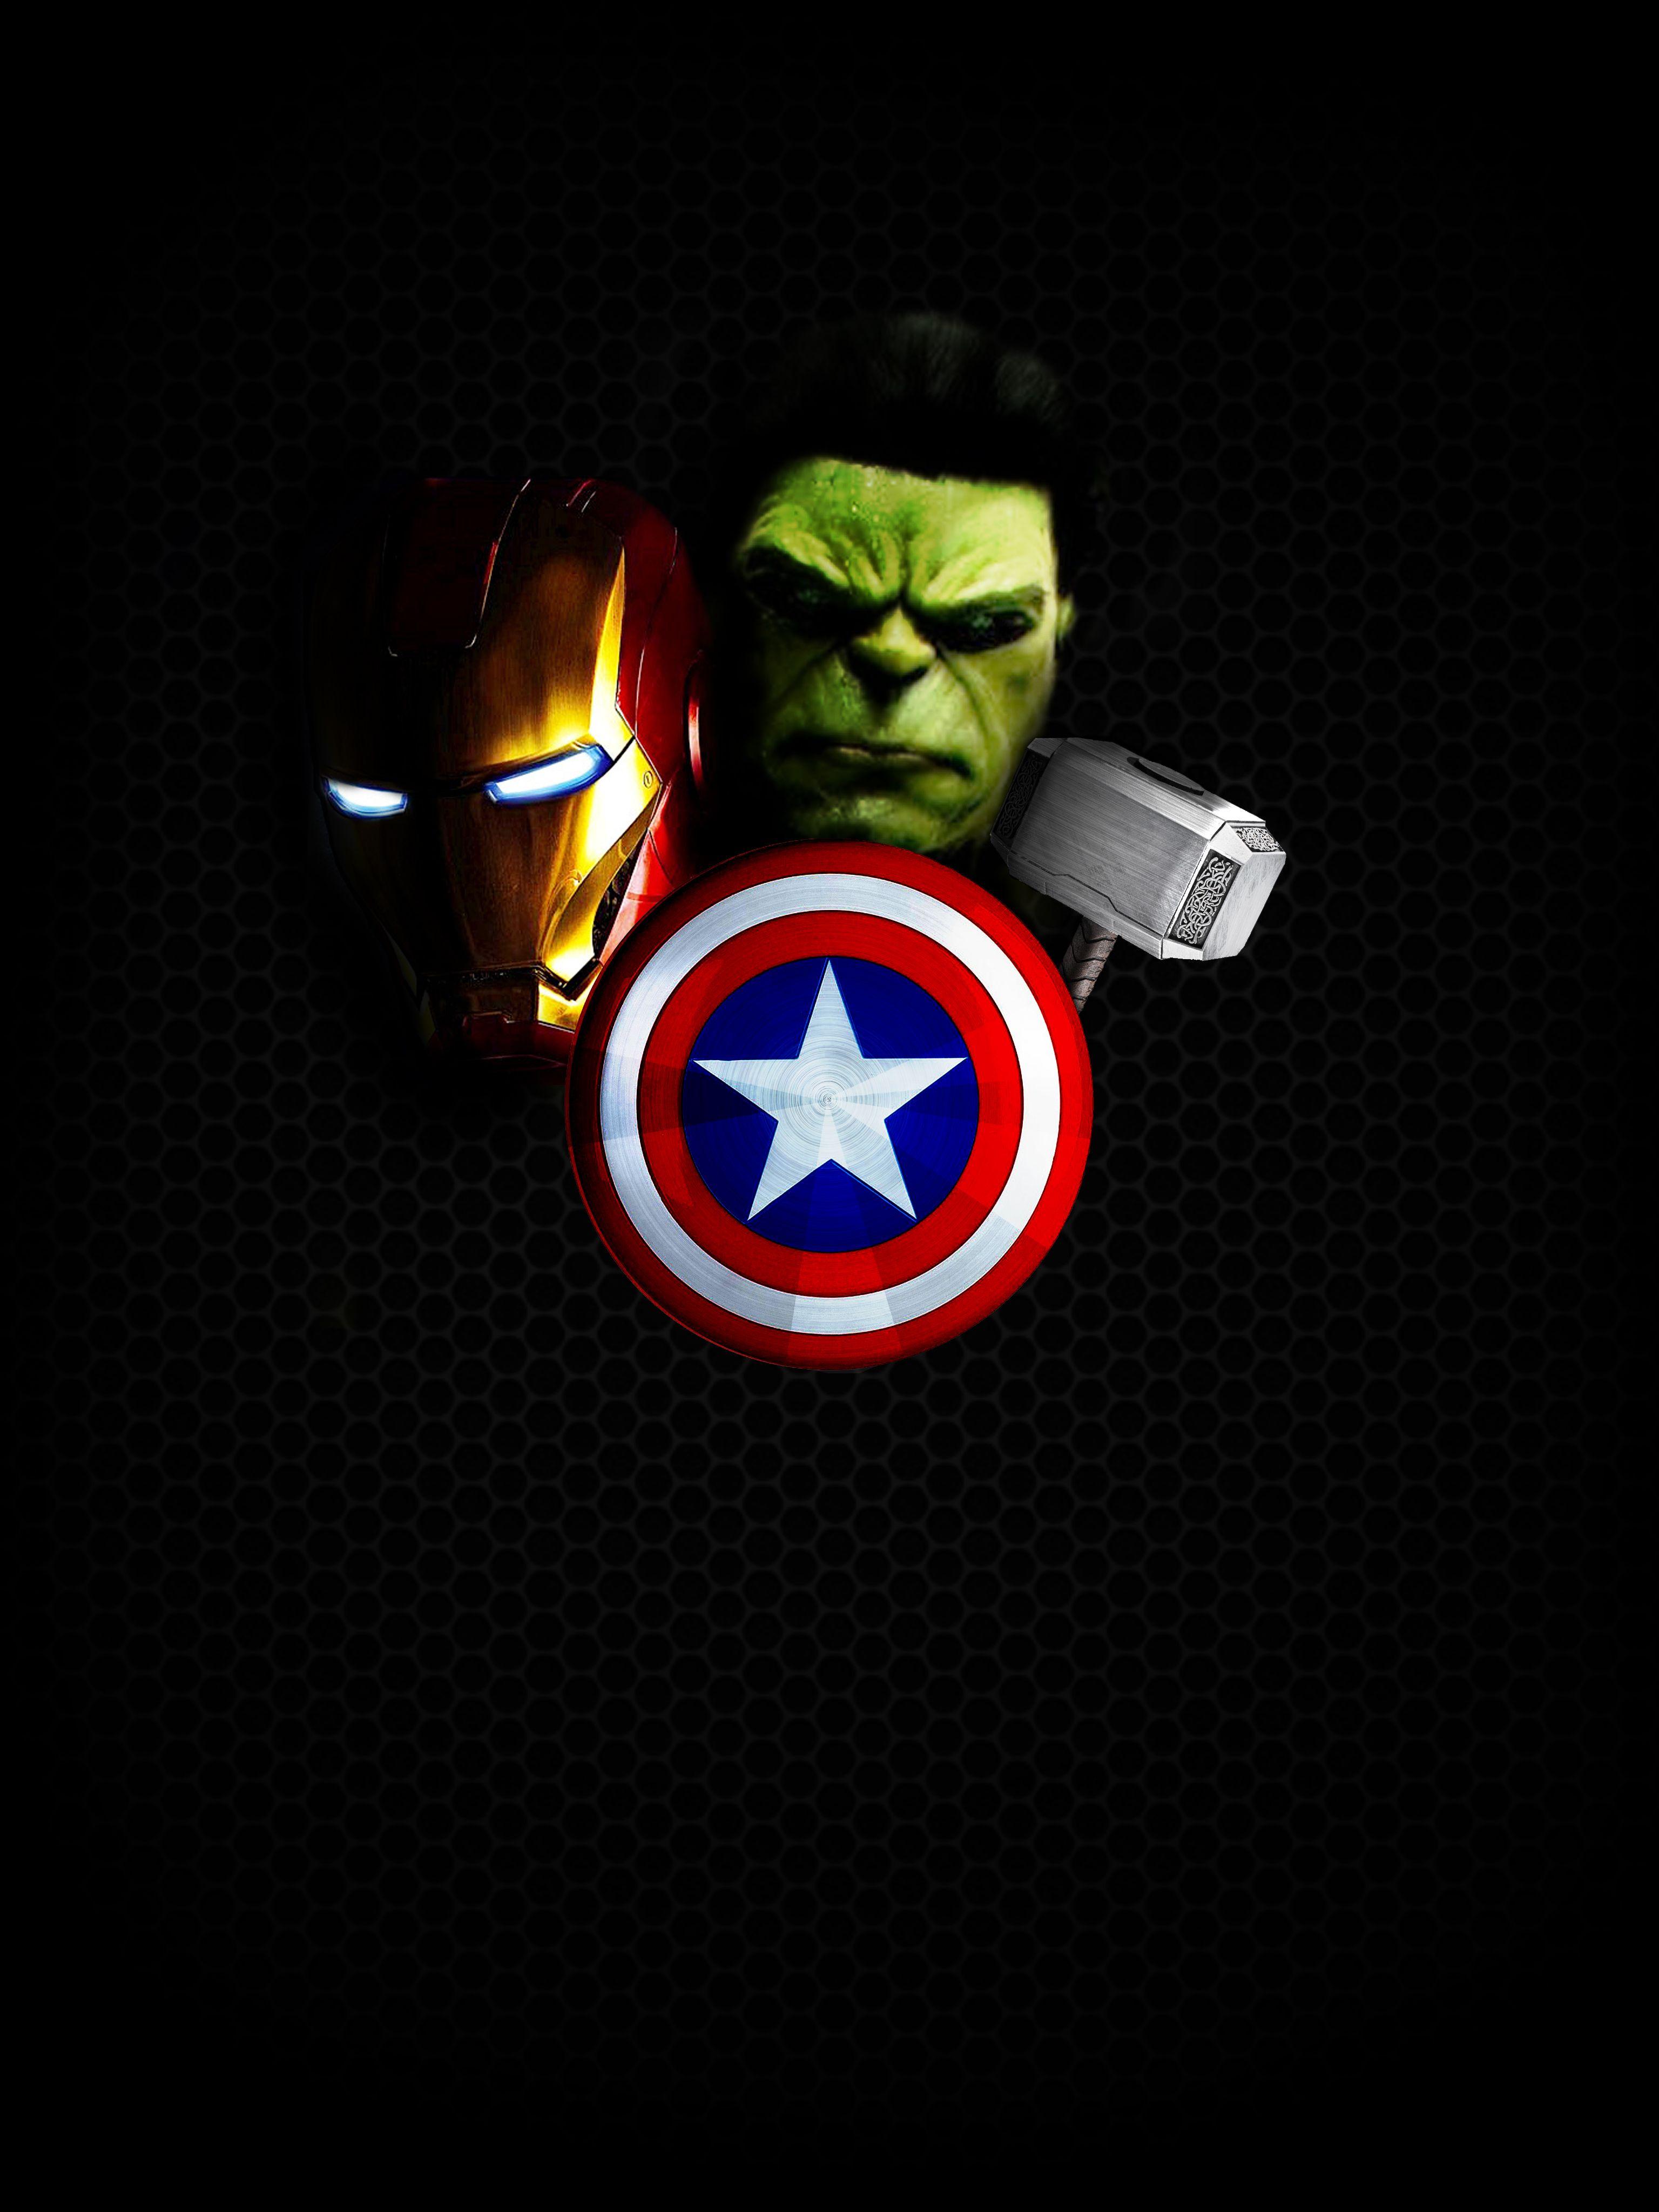 Avengers Hd Wallpapers 1080p Download For Mobile